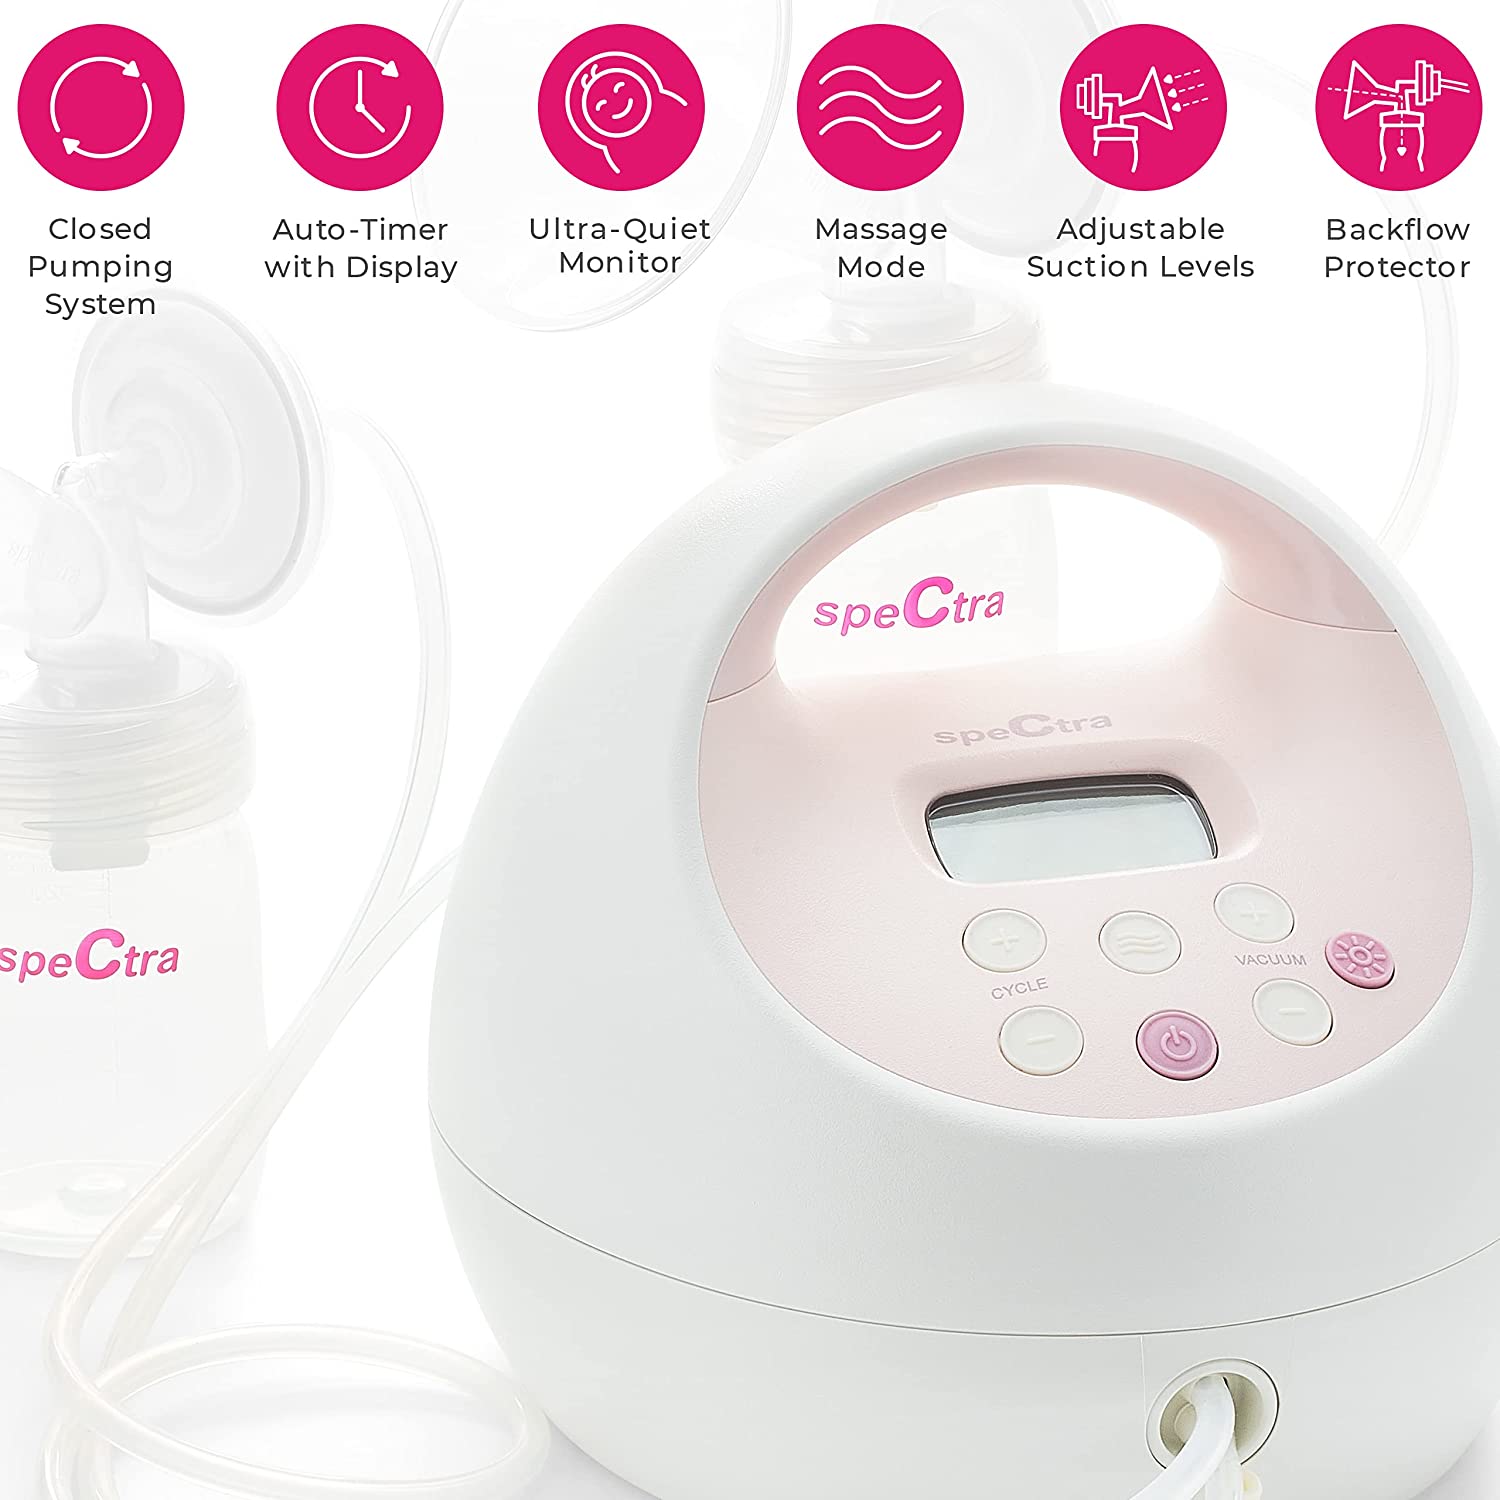 Spectra - S2 Plus Electric Breast Milk Pump for Baby Feeding